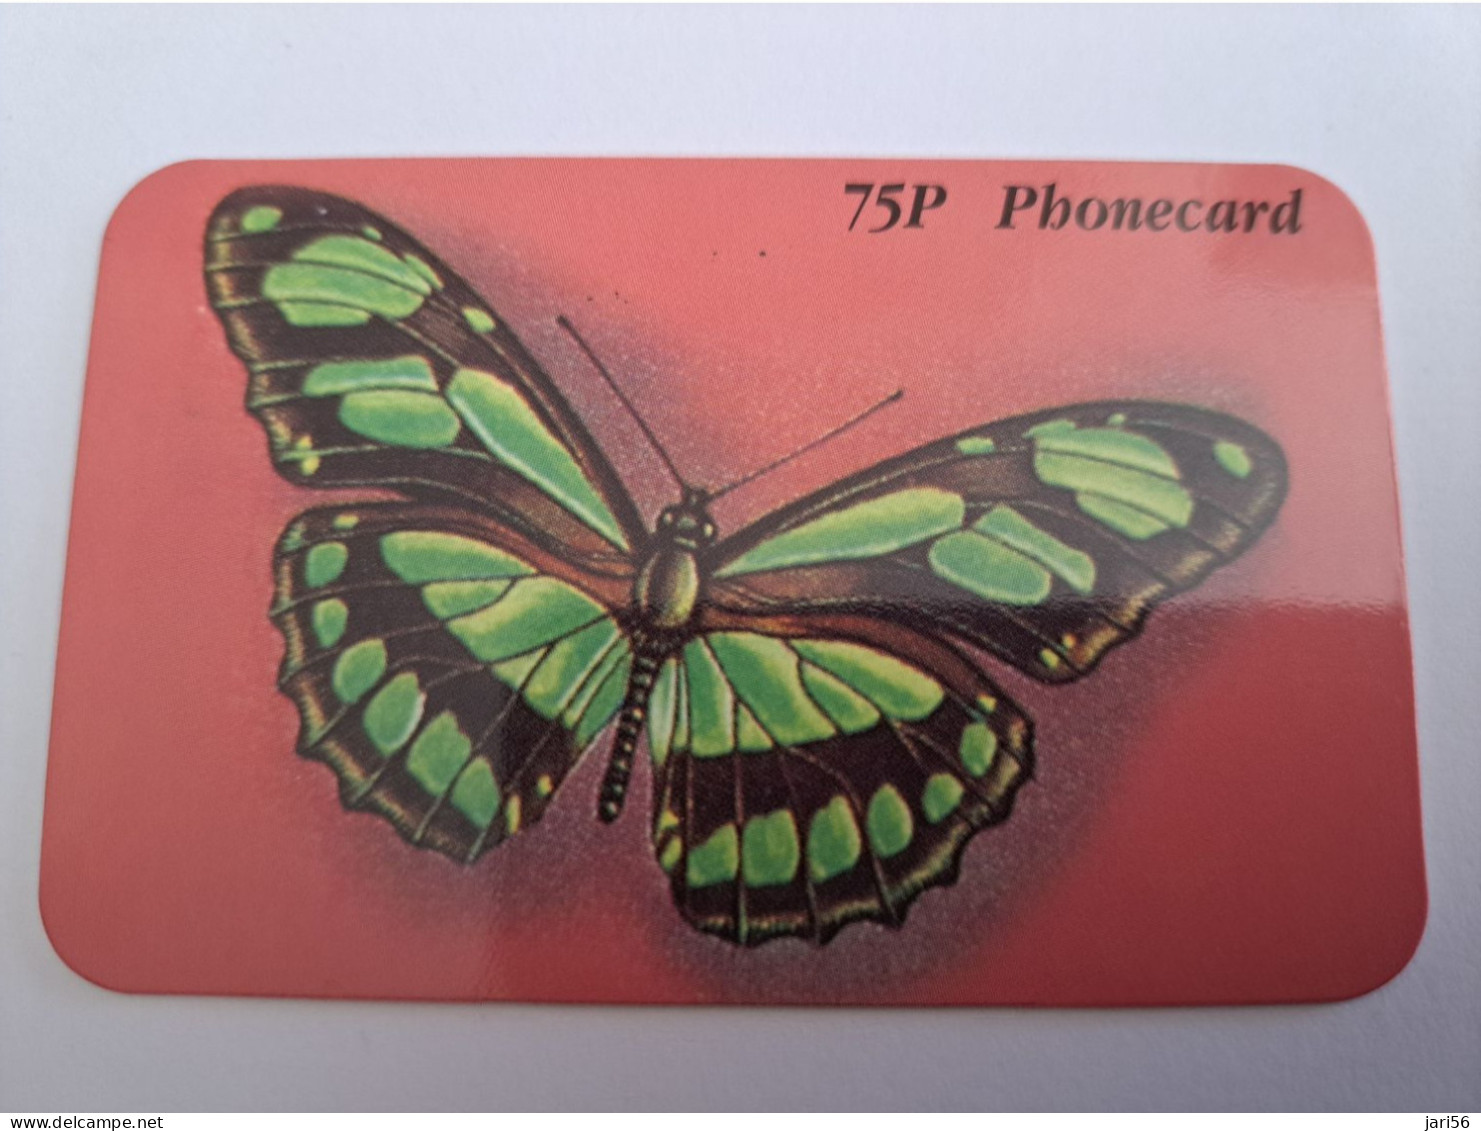 GREAT BRITAIN  / DISCOUNT PHONECARD/BUTTERFLY / 75 PENCE    PREPAID CARD / MINT      **13586** - [10] Colecciones